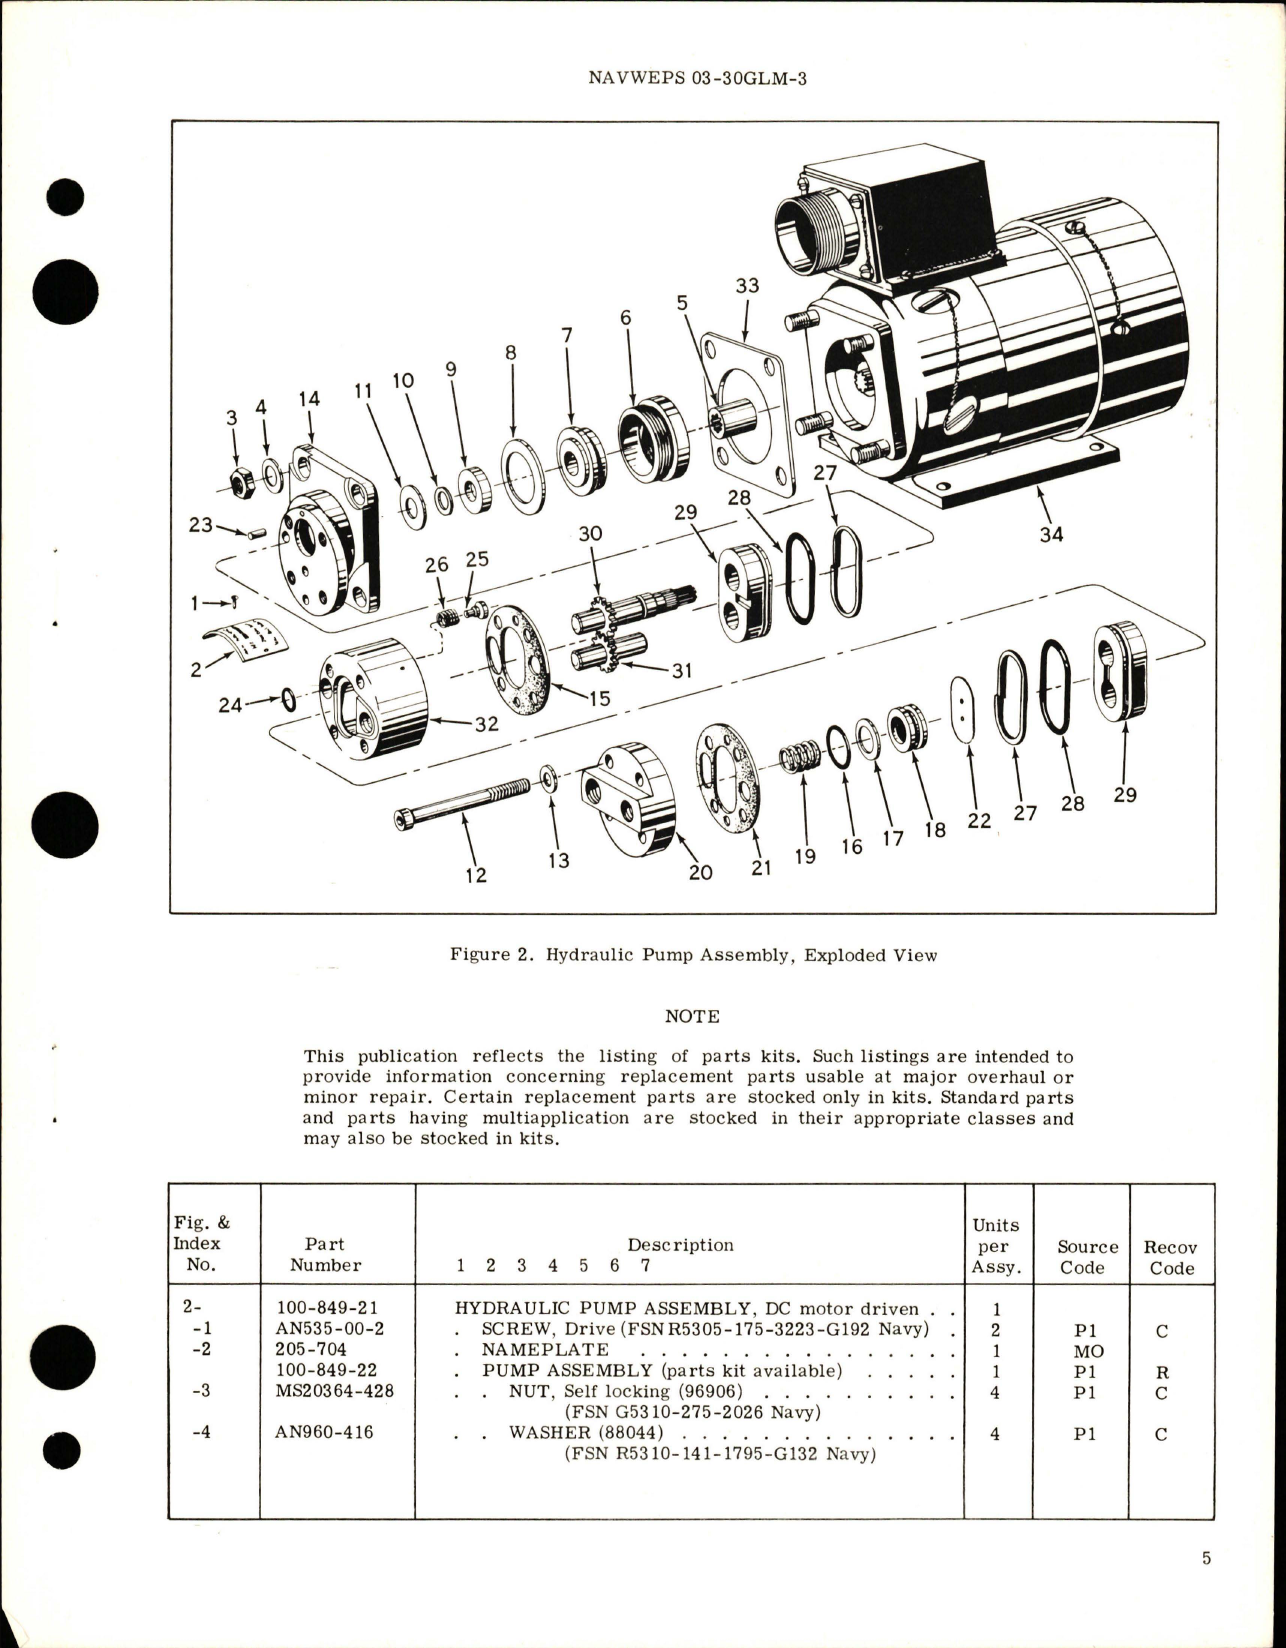 Sample page 5 from AirCorps Library document: Overhaul Instructions with Parts Breakdown for Motor-Driven Hydraulic Pump - Part 100-849-21